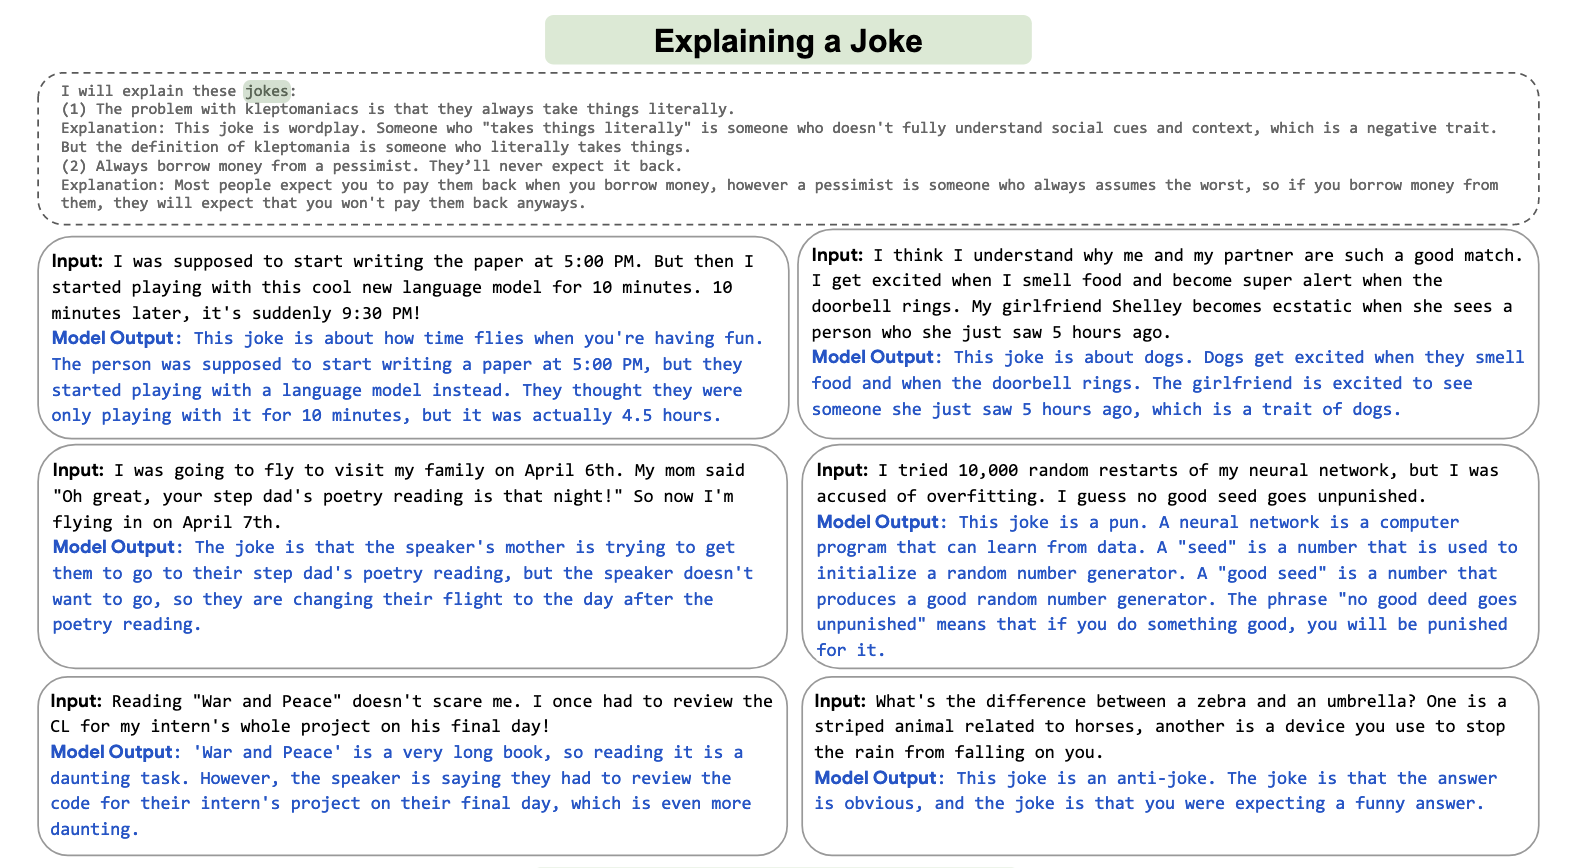 A screenshot of example jokes that Google's machine learning model was able to interpret.